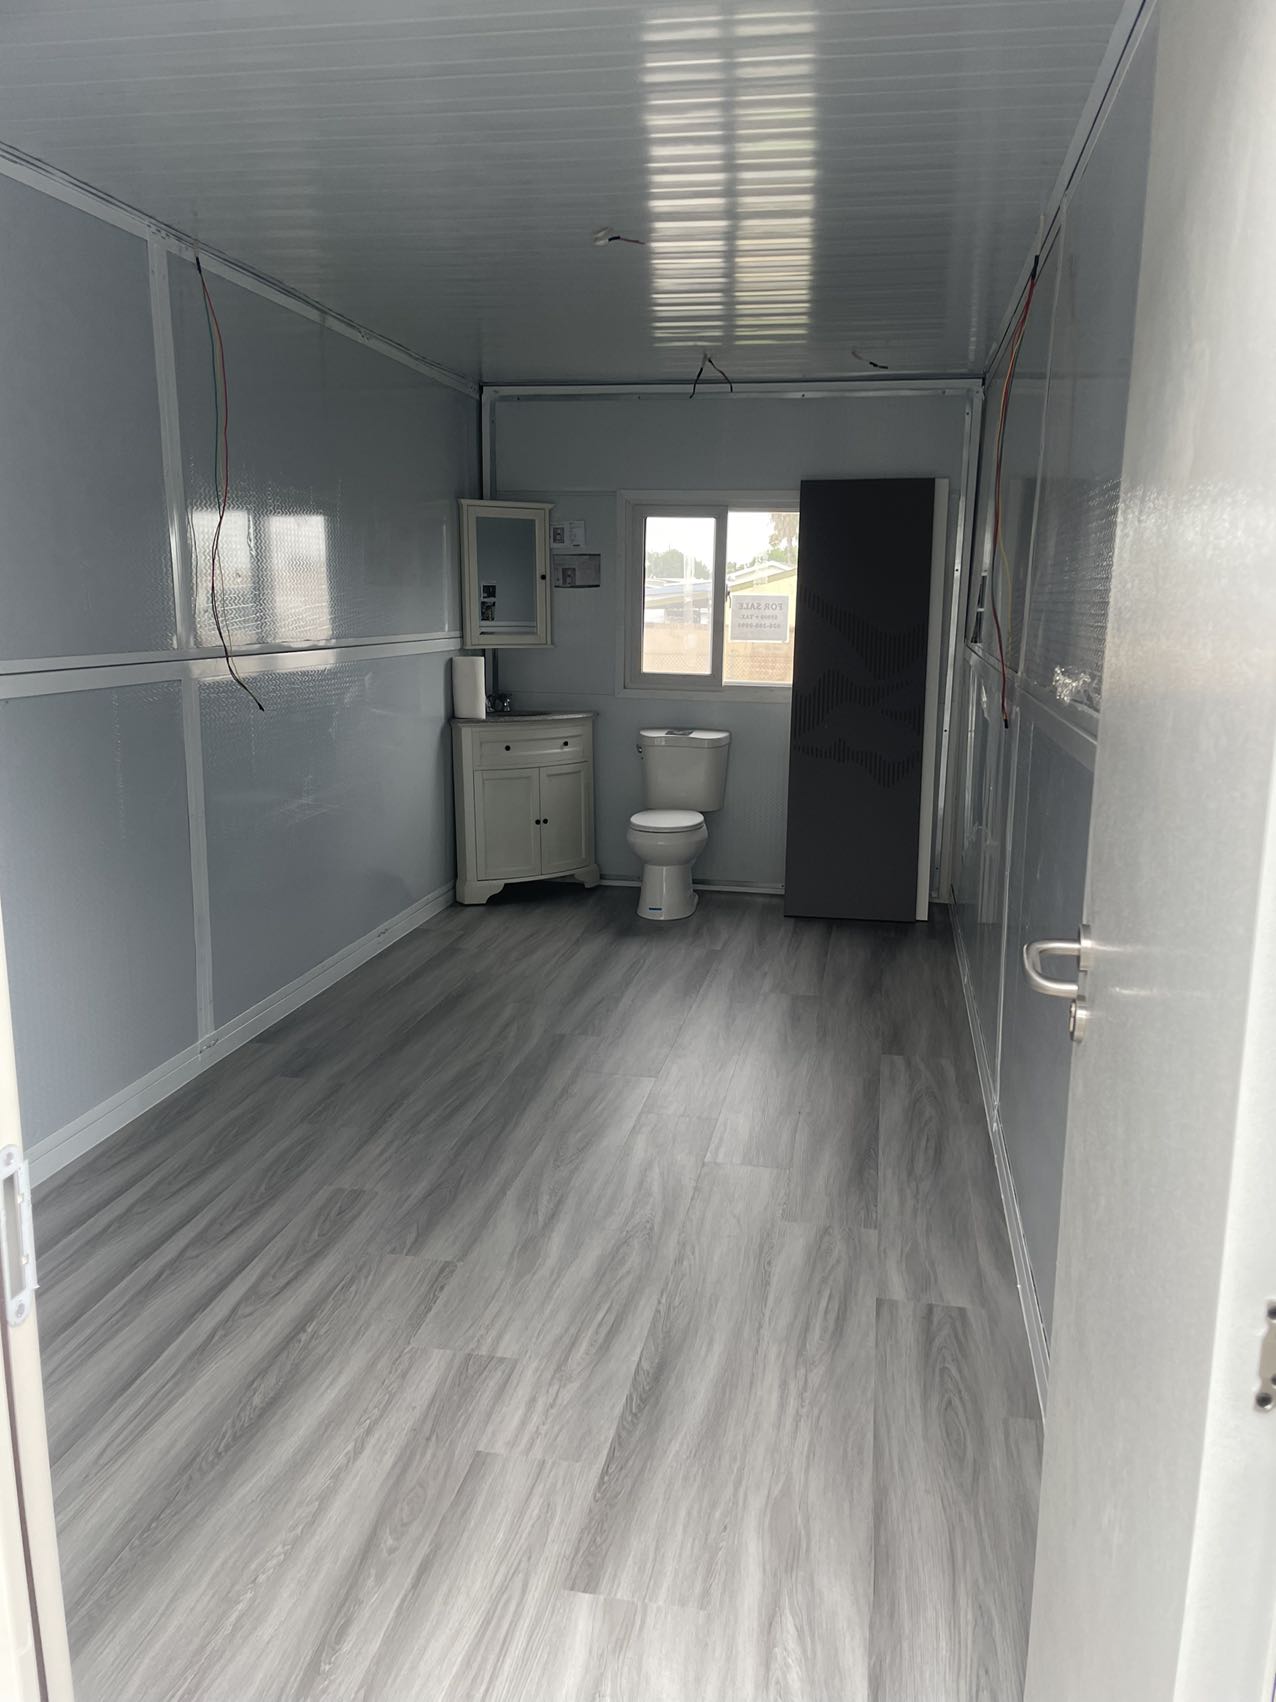 20*8.3*8.4ft Prefab Modular Tiny Container home with Bathroom